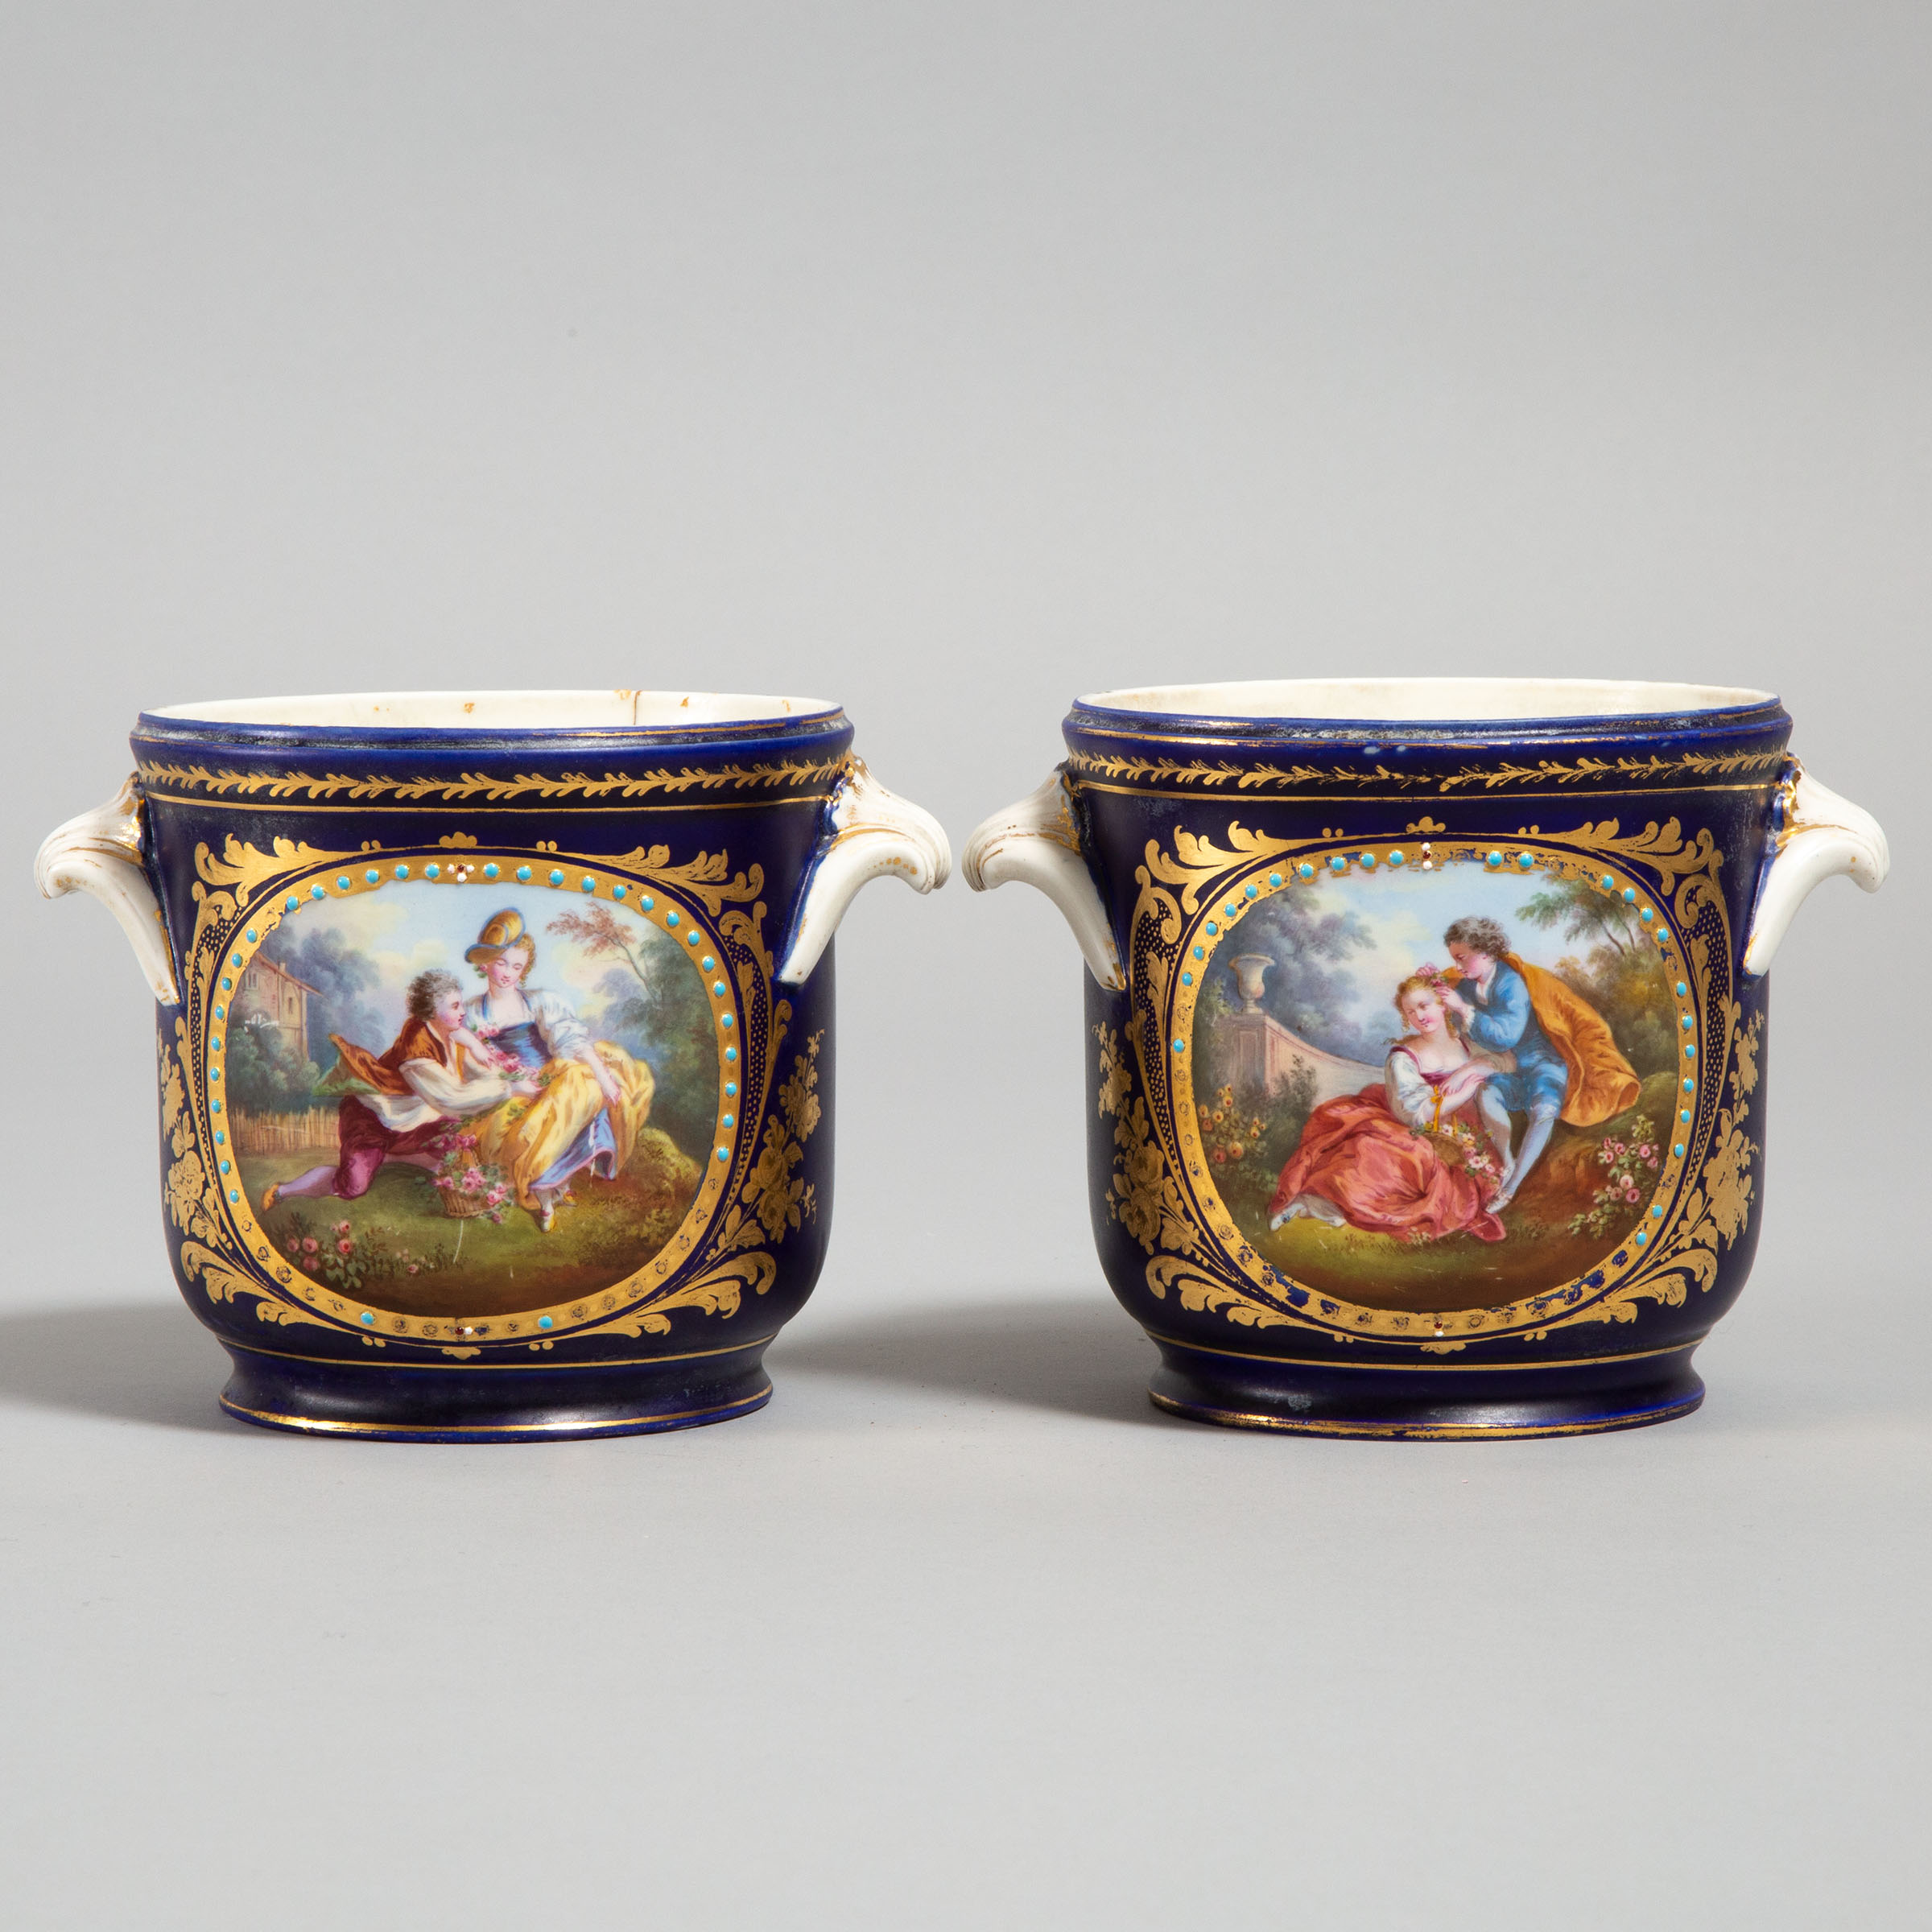 Pair of 'Sèvres' Cachepots, late 19th century